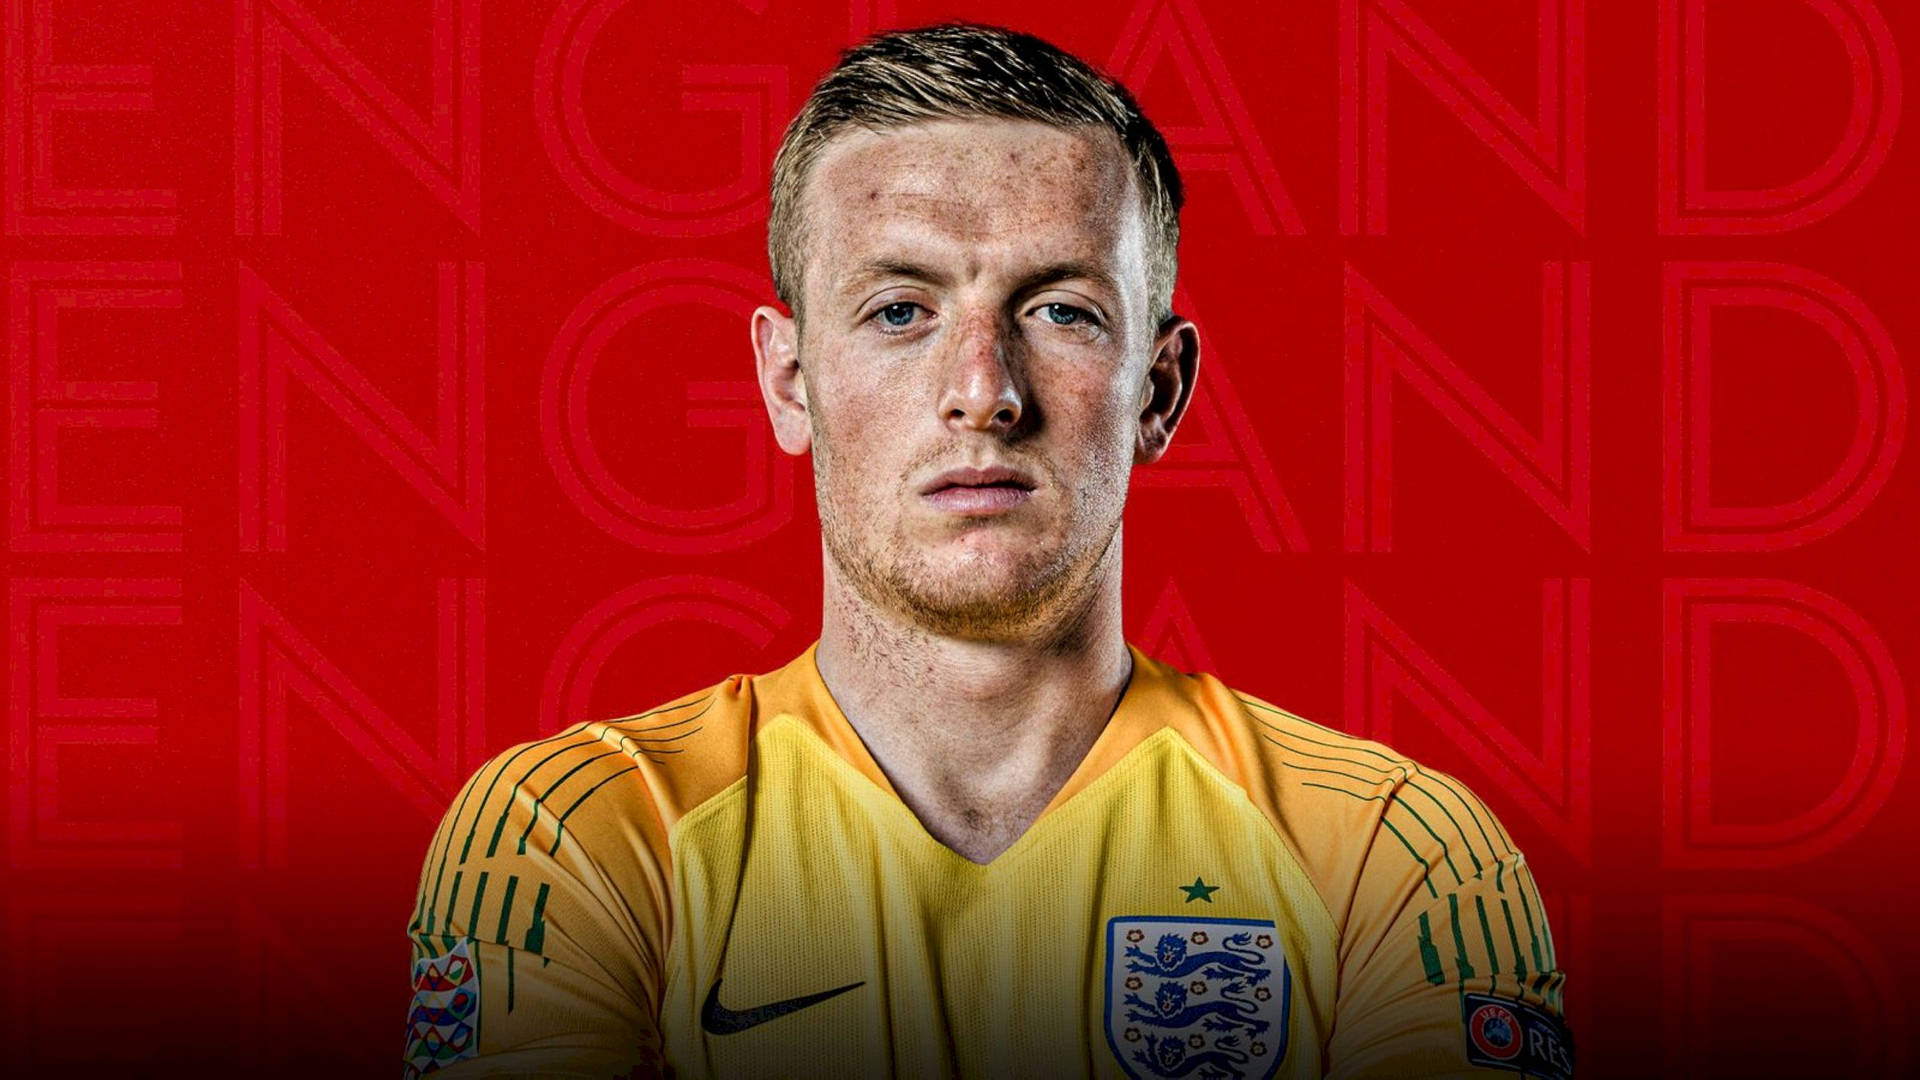 Jordan Pickford With Red Background Wallpaper